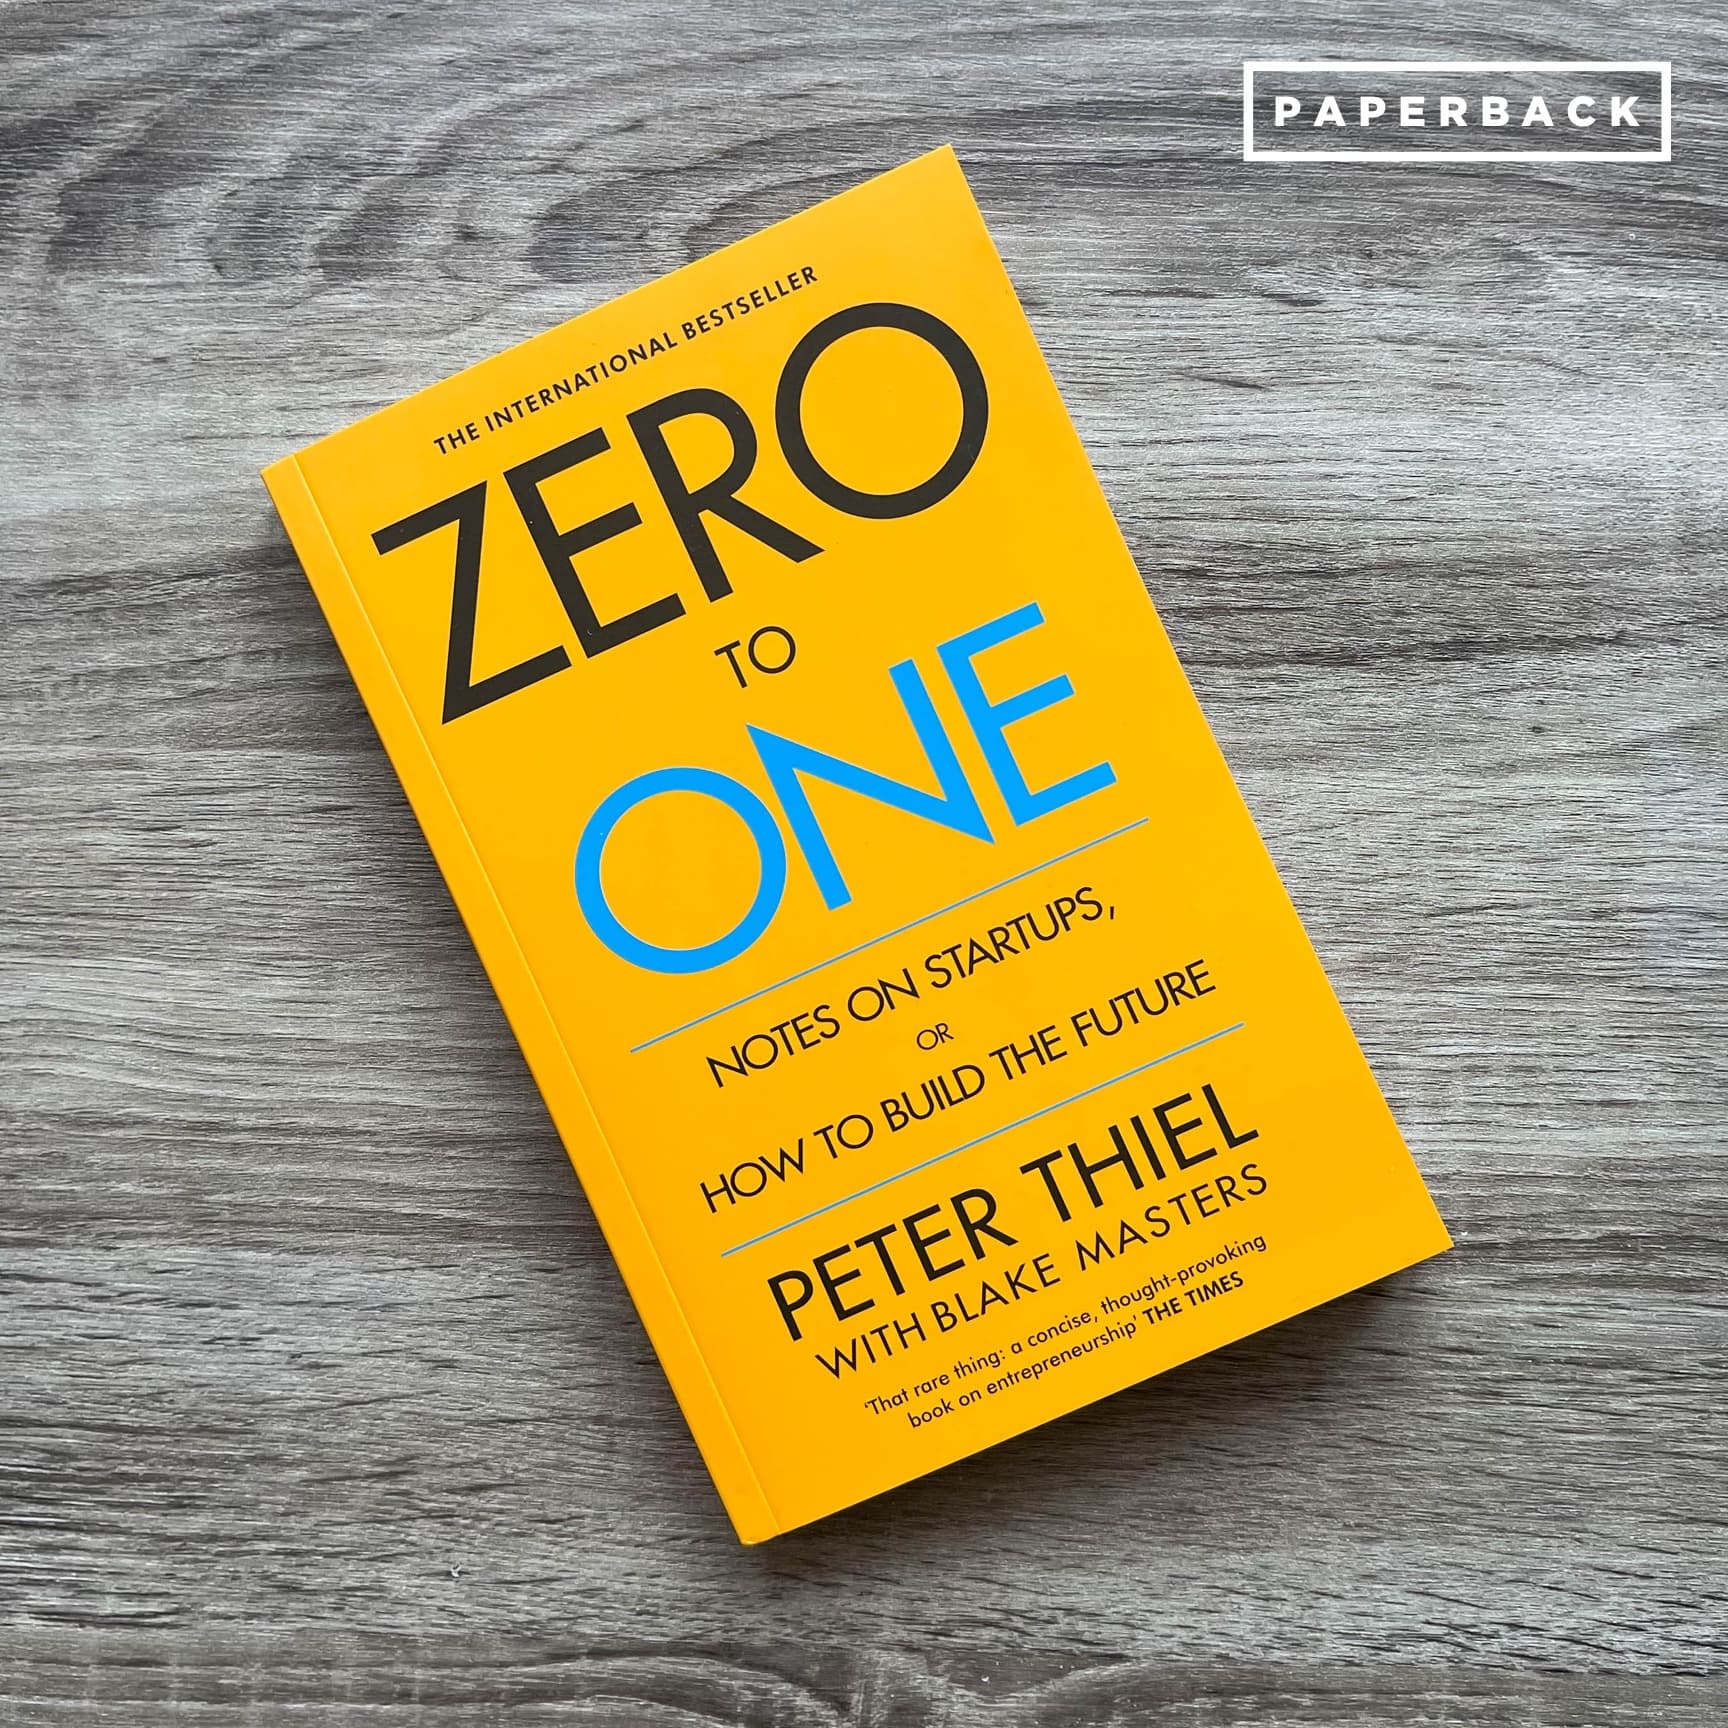 Zero to One: Notes on Start Ups, or How to Build the Future